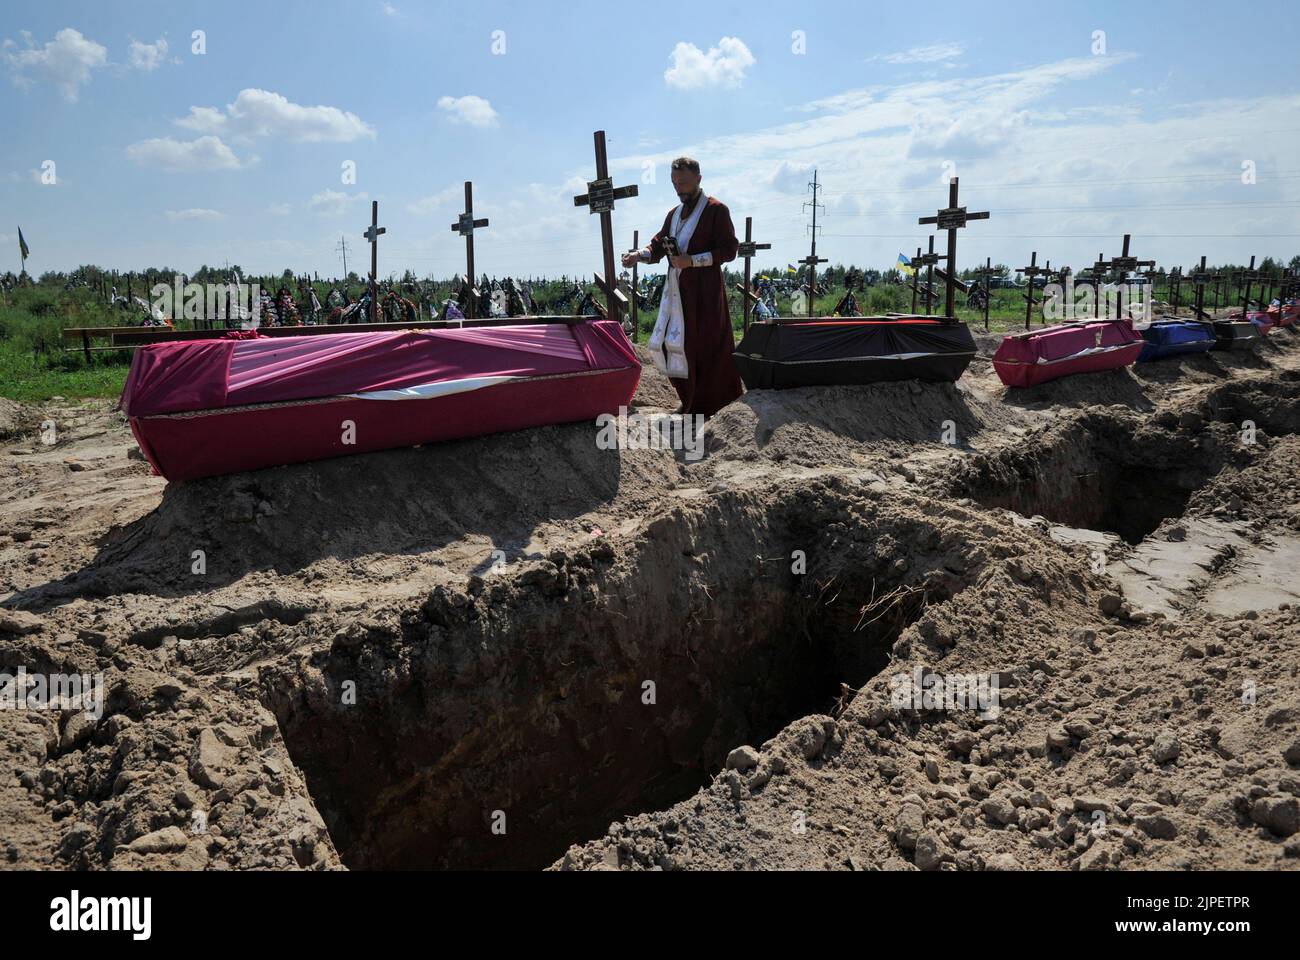 An Orthodox priest reads a prayer at the graves of unidentified civilians who were killed by the Russian military during the occupation of the city of Bucha. On Wednesday, 21 unidentified people who were killed by the Russian military in February-March 2022 were buried at the local cemetery. Russia invaded Ukraine on 24 February 2022, triggering the largest military attack in Europe since World War II. Stock Photo